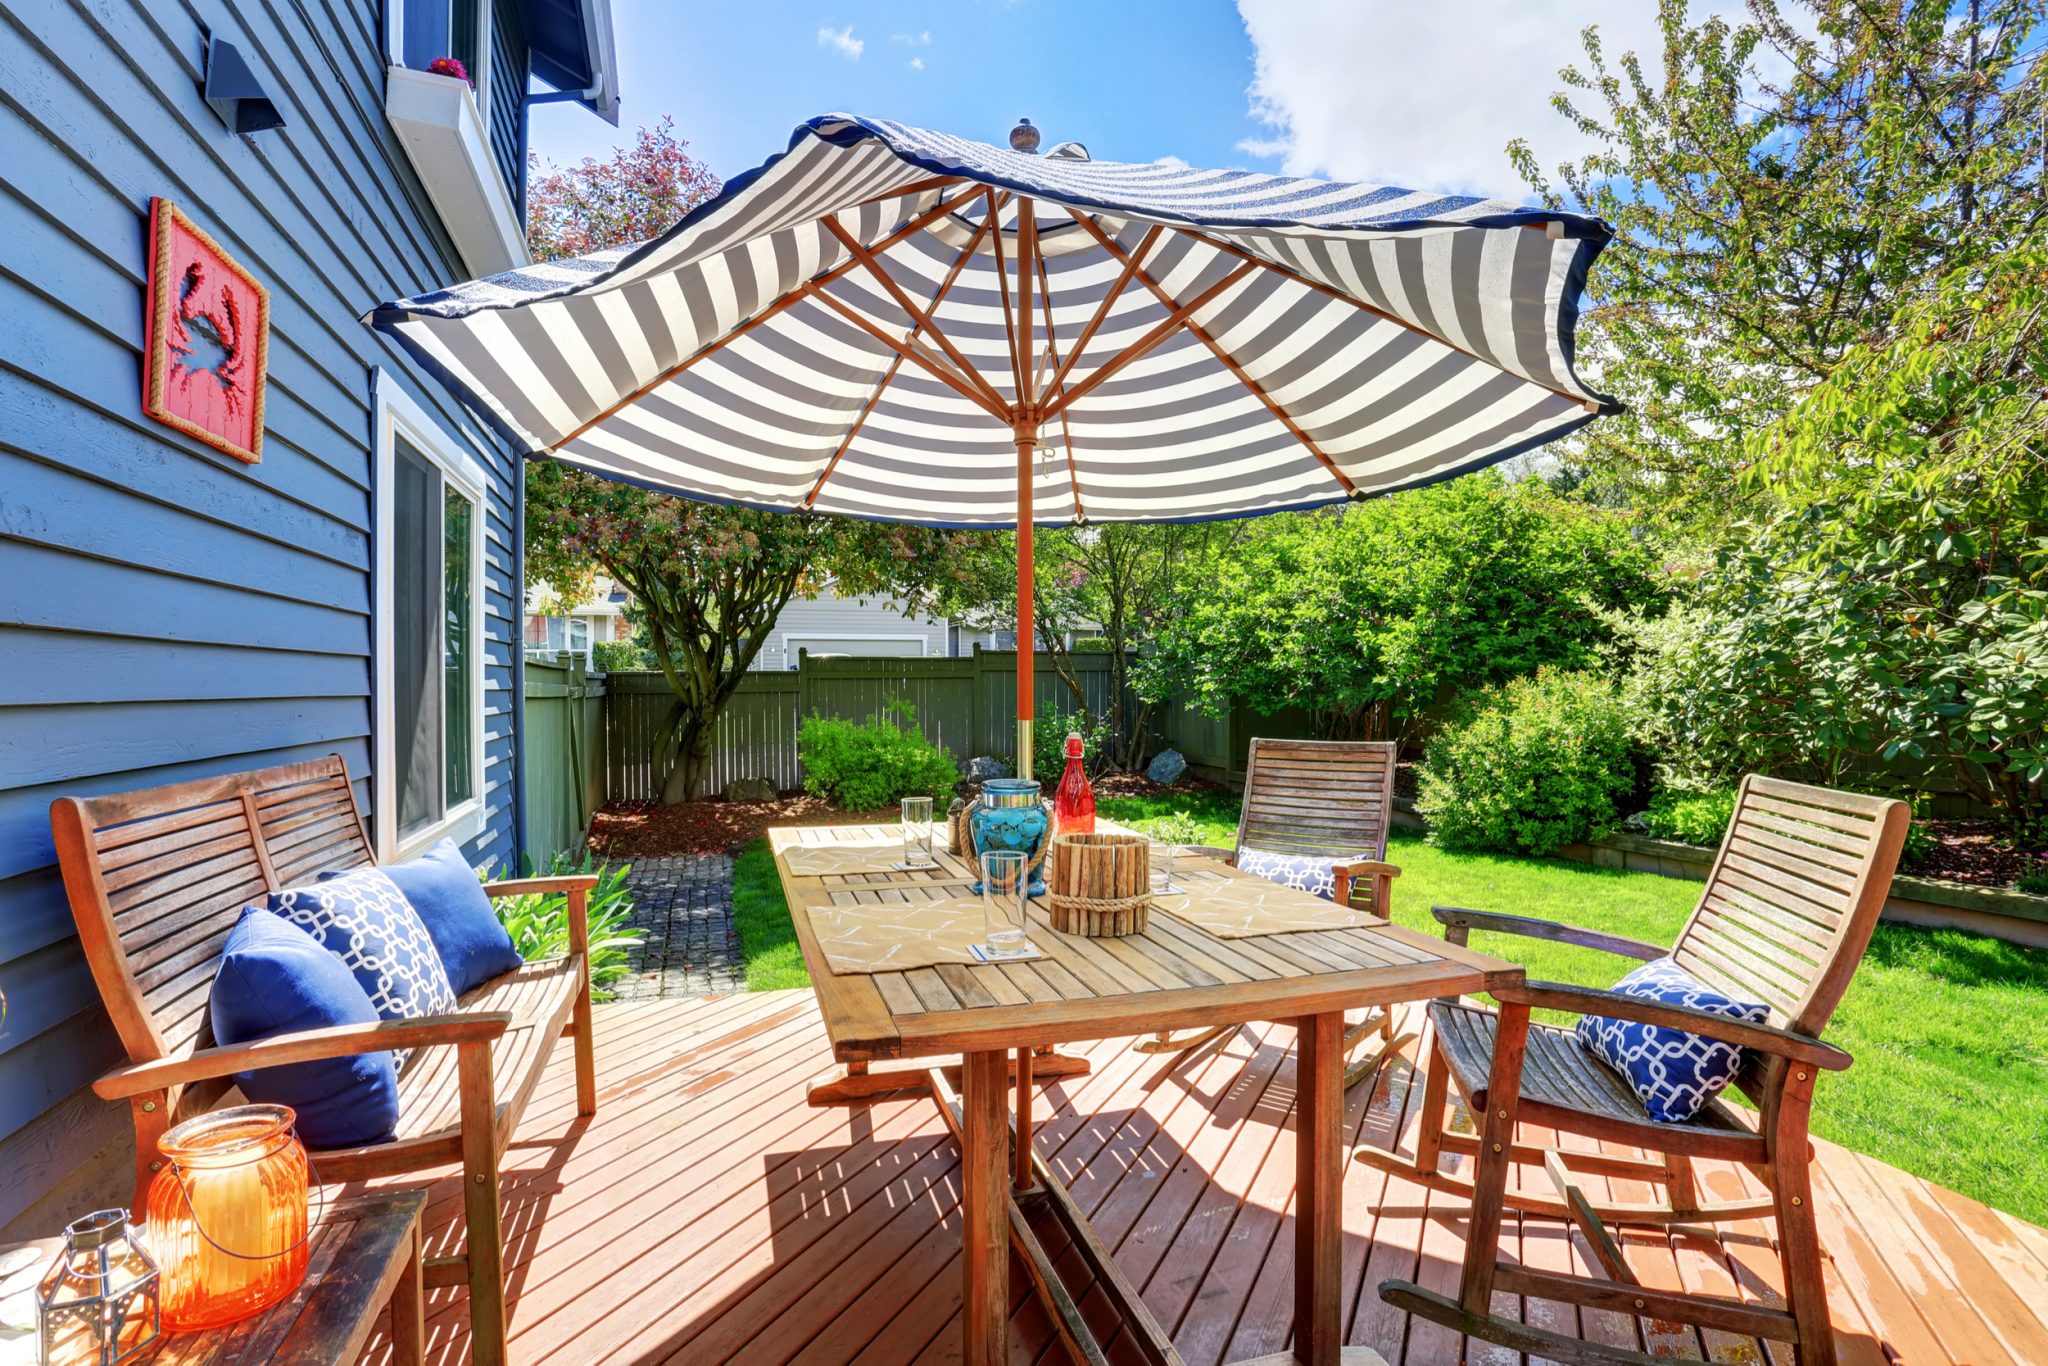 25 Patio Shade Ideas for Your Backyard | INSTALL-IT-DIRECT